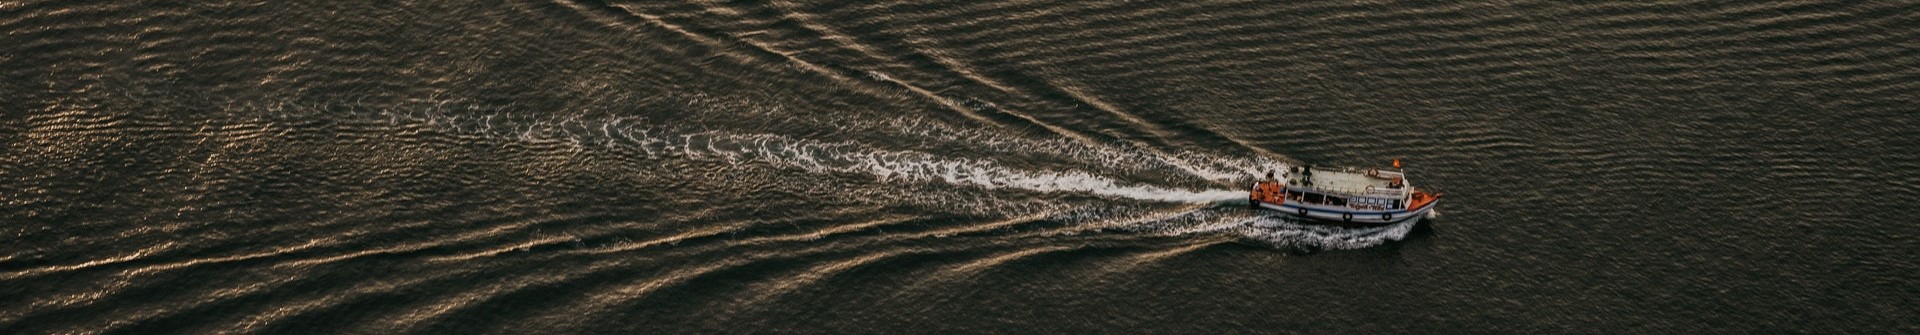 Birds eye view of a boat moving through water